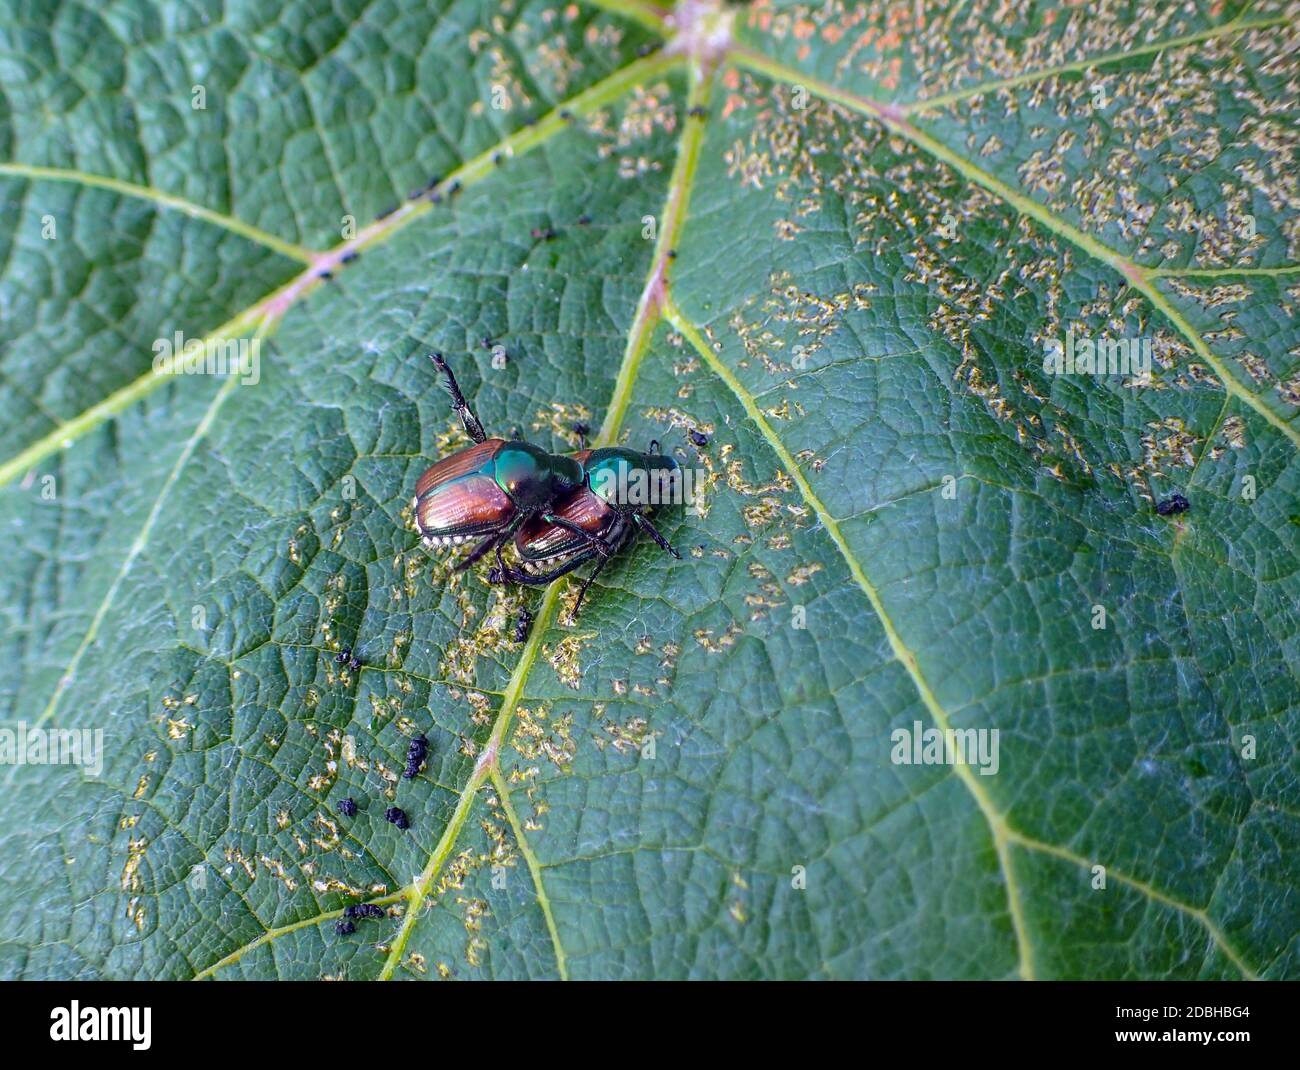 Two japanese beetles decide to mate on top of a grape leaf found in Missouri. The macro photo focuses on the two insects and features a bokeh effect t Stock Photo